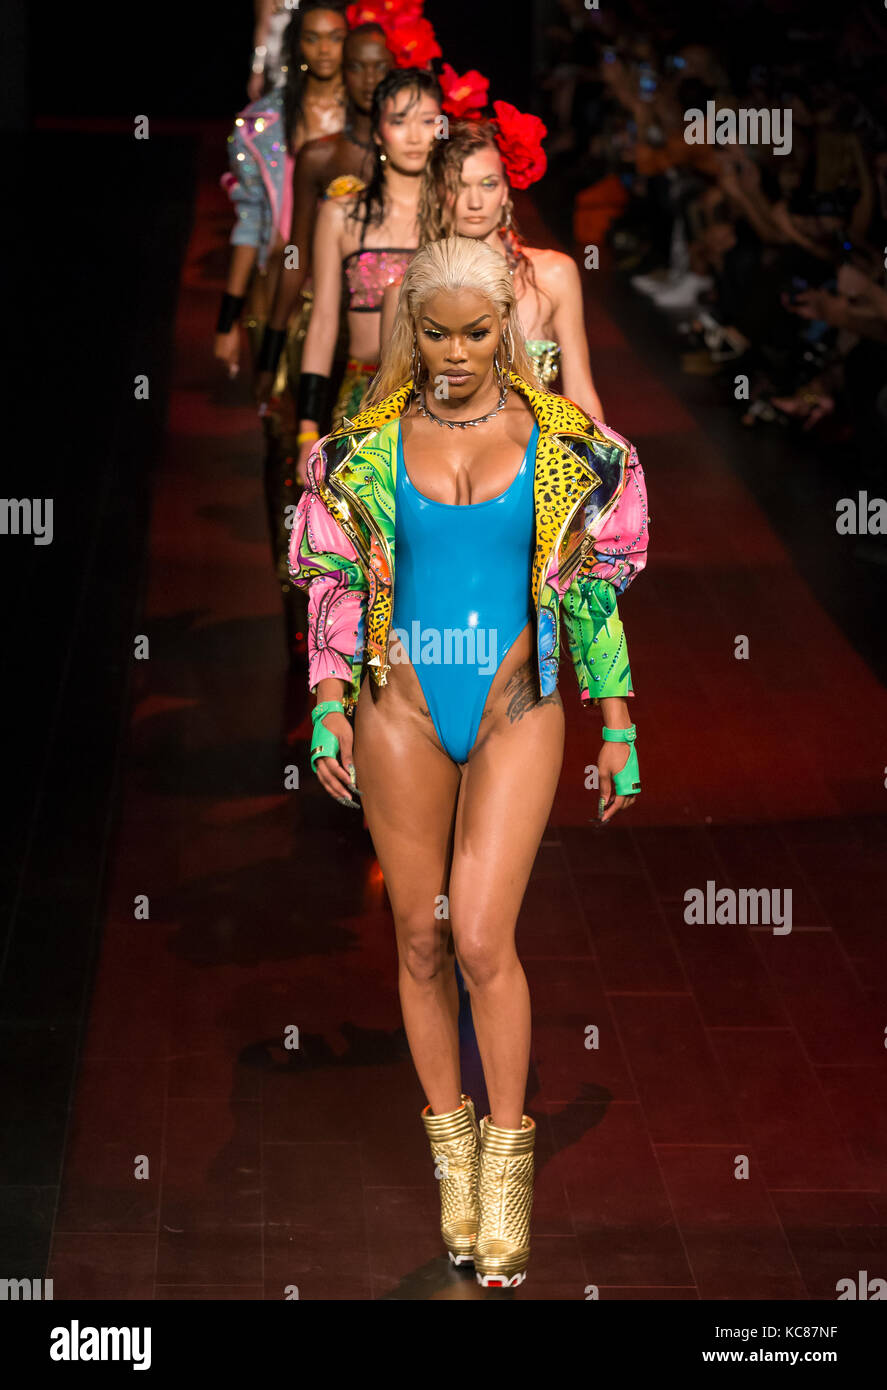 NEW YORK, NY - September 12, 2017: Models walk the runway at The Blonds Spring Summer 2018 fashion show during New York Fashion Week Stock Photo